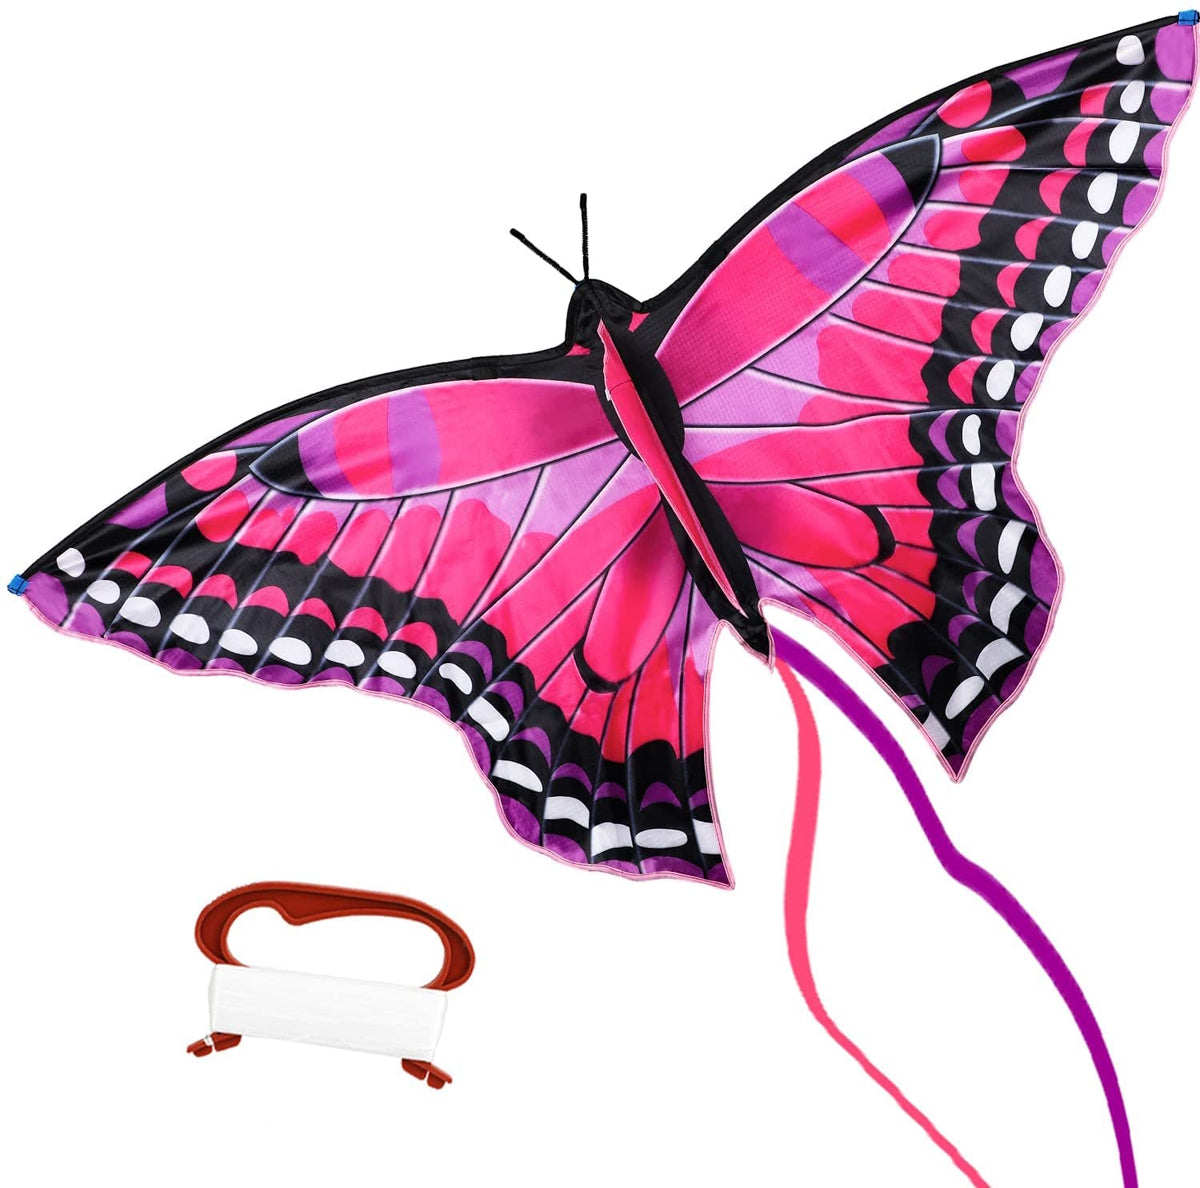 Professional Butterfly Kite Paper Flying Toys For Kids Dragon Cerf Volant  Enfant 230605 From Factory From Pang07, $9.41